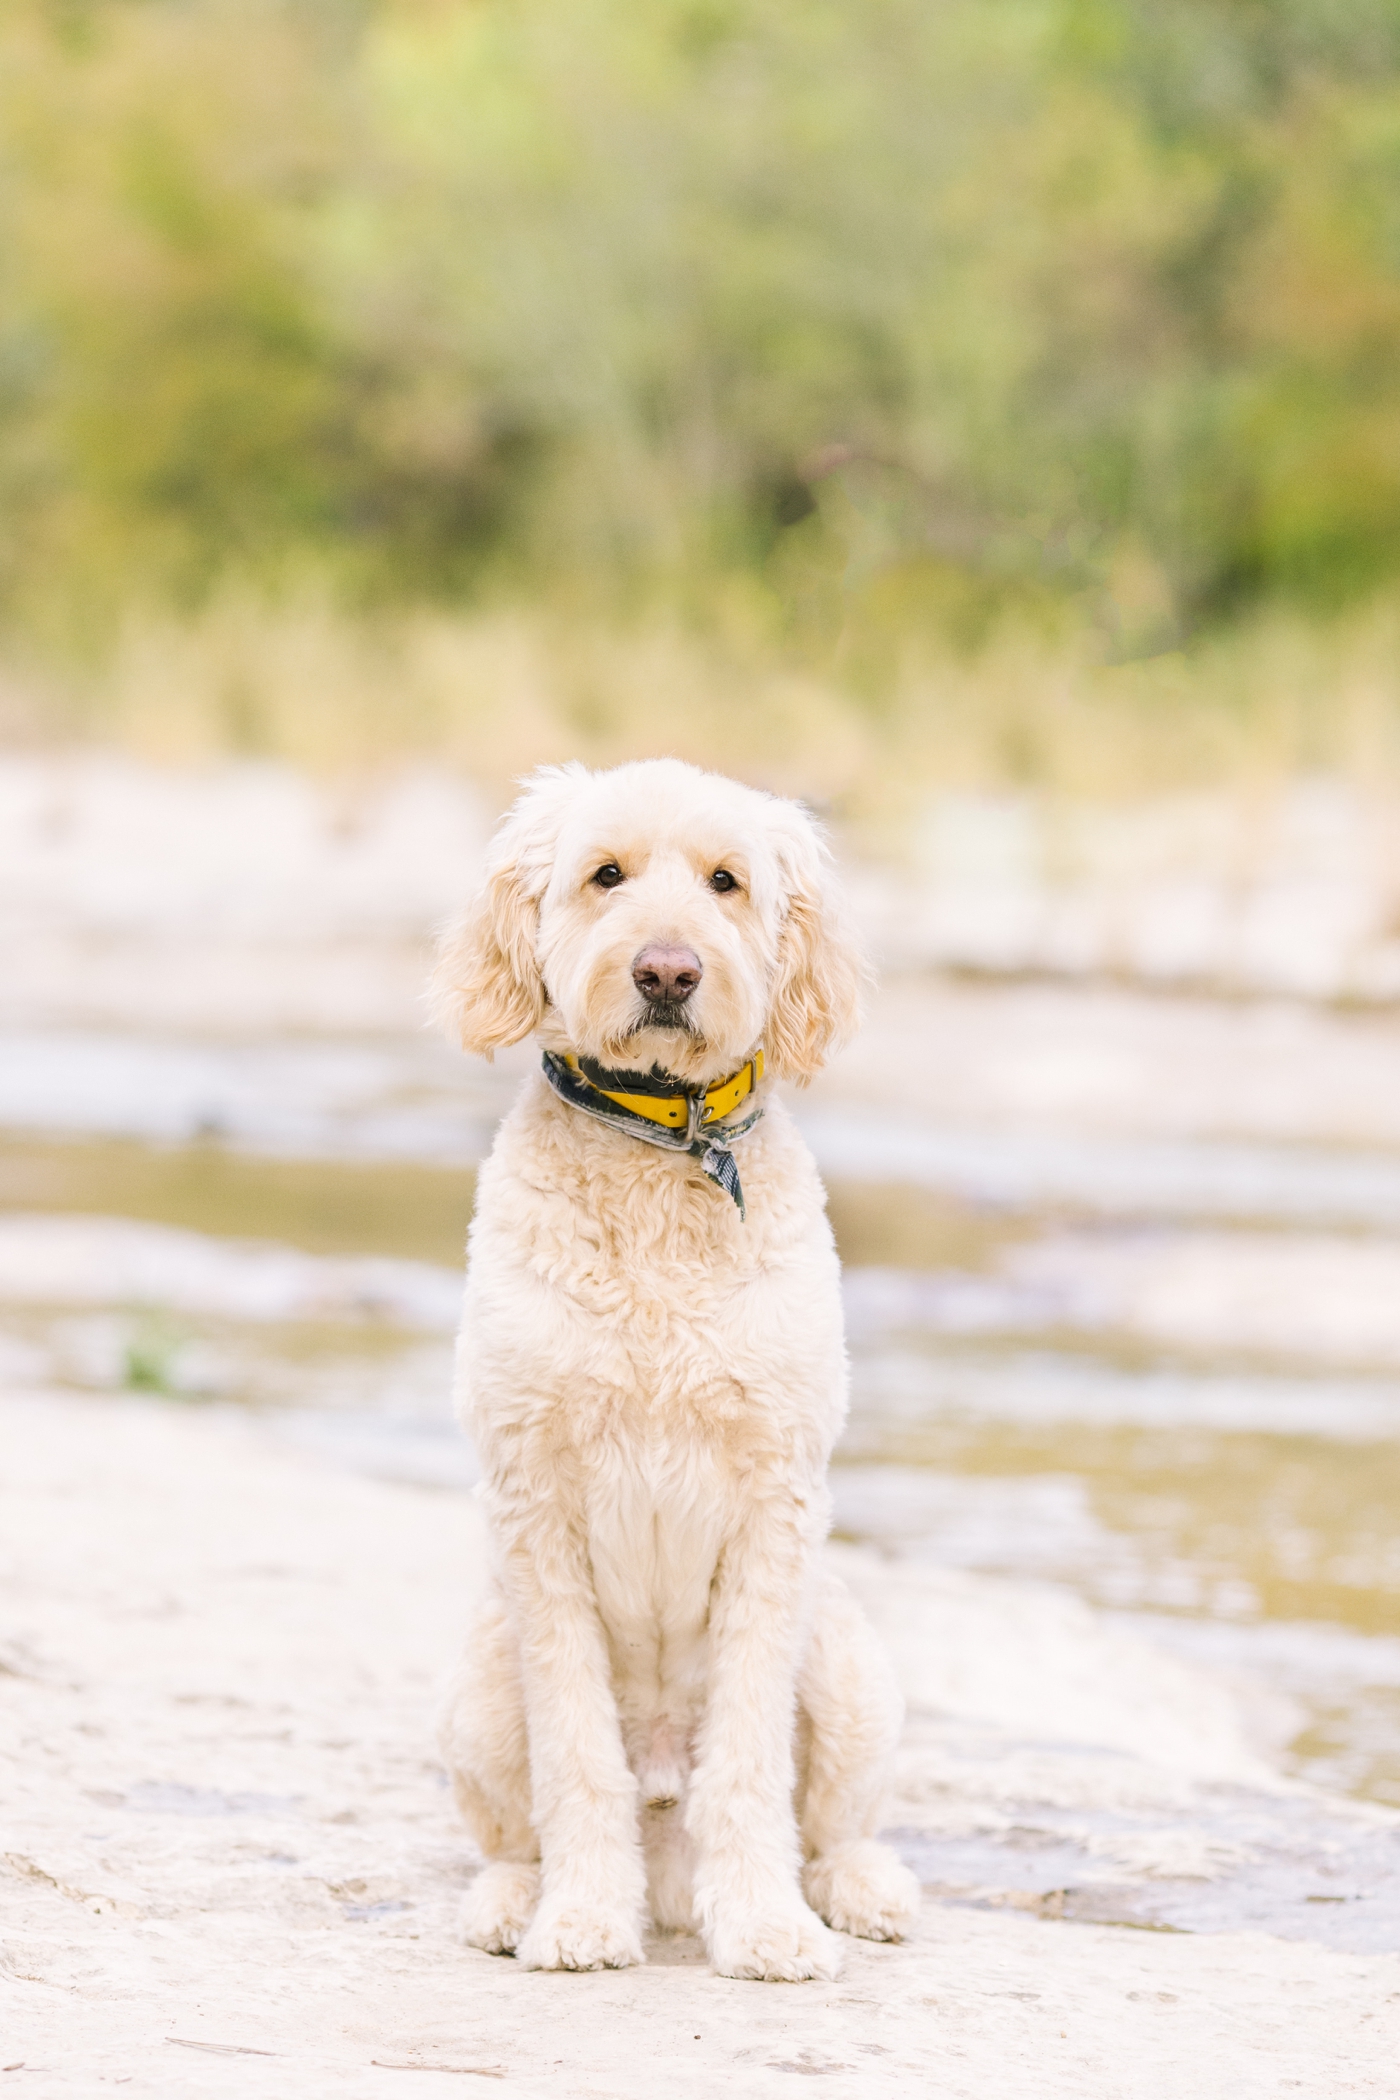 Family dog by creek in Austin, TX. Photo by Sana Ahmed Photography.